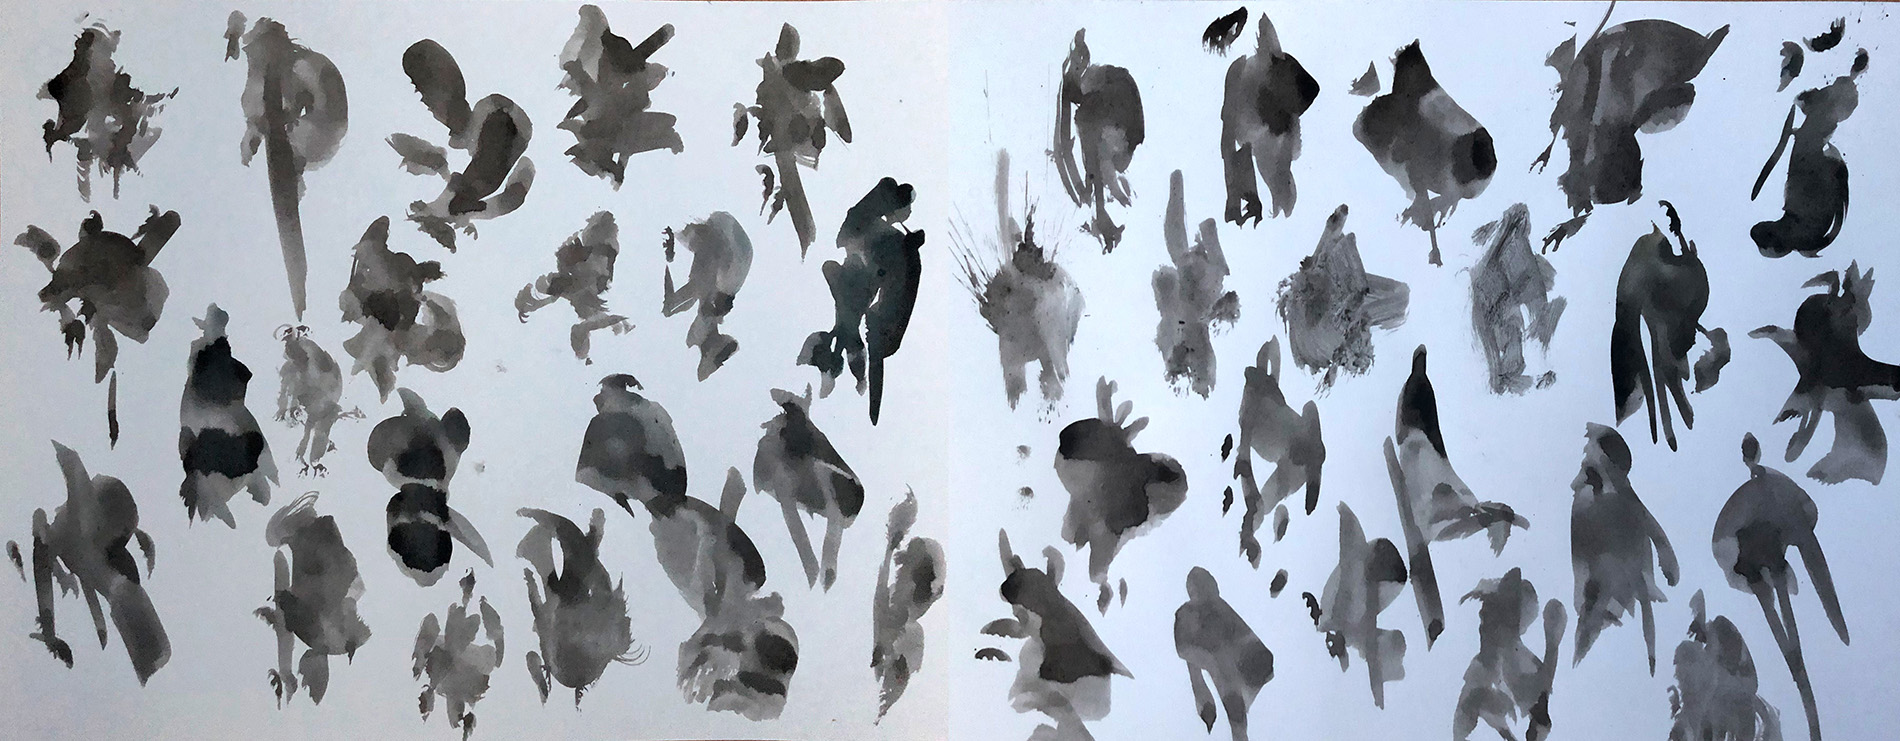 A page full of shapes made with ink drops.